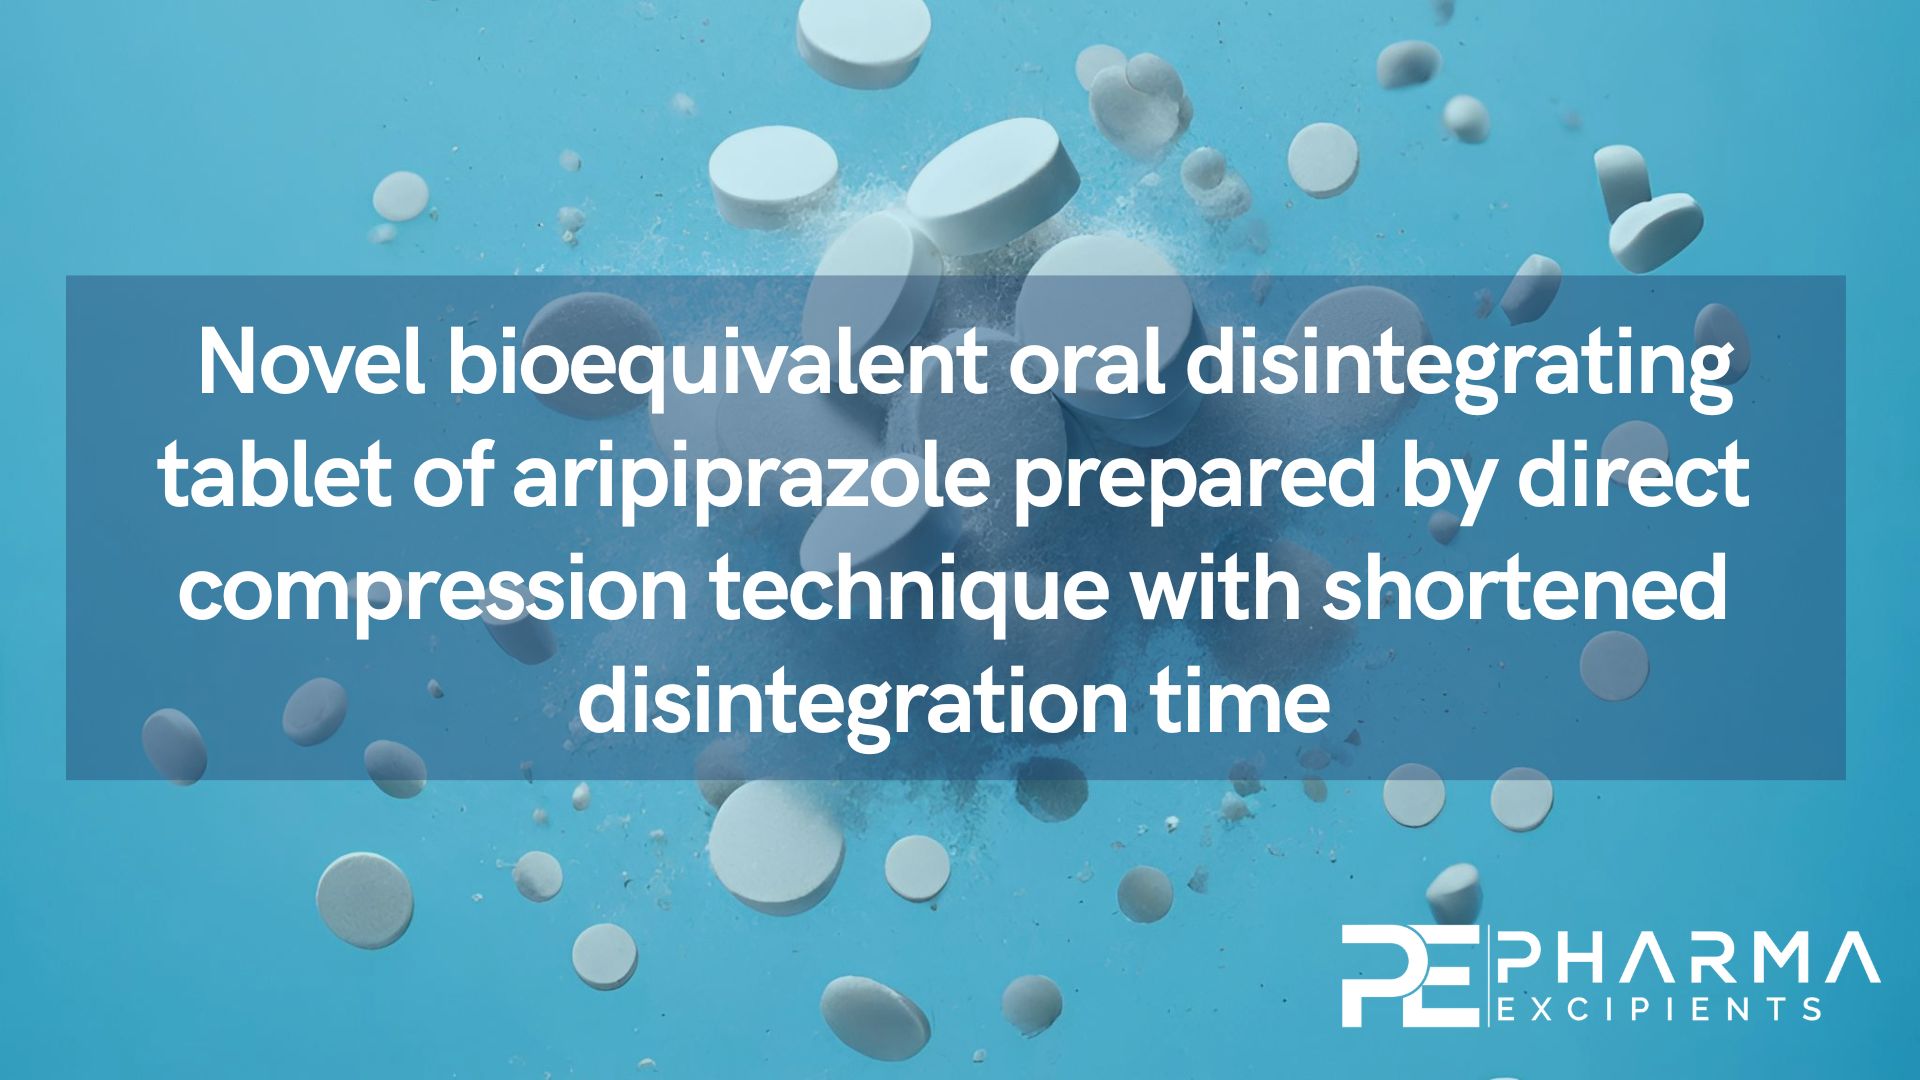 Novel bioequivalent oral disintegrating tablet of aripiprazole prepared by direct compression technique with shortened disintegration time